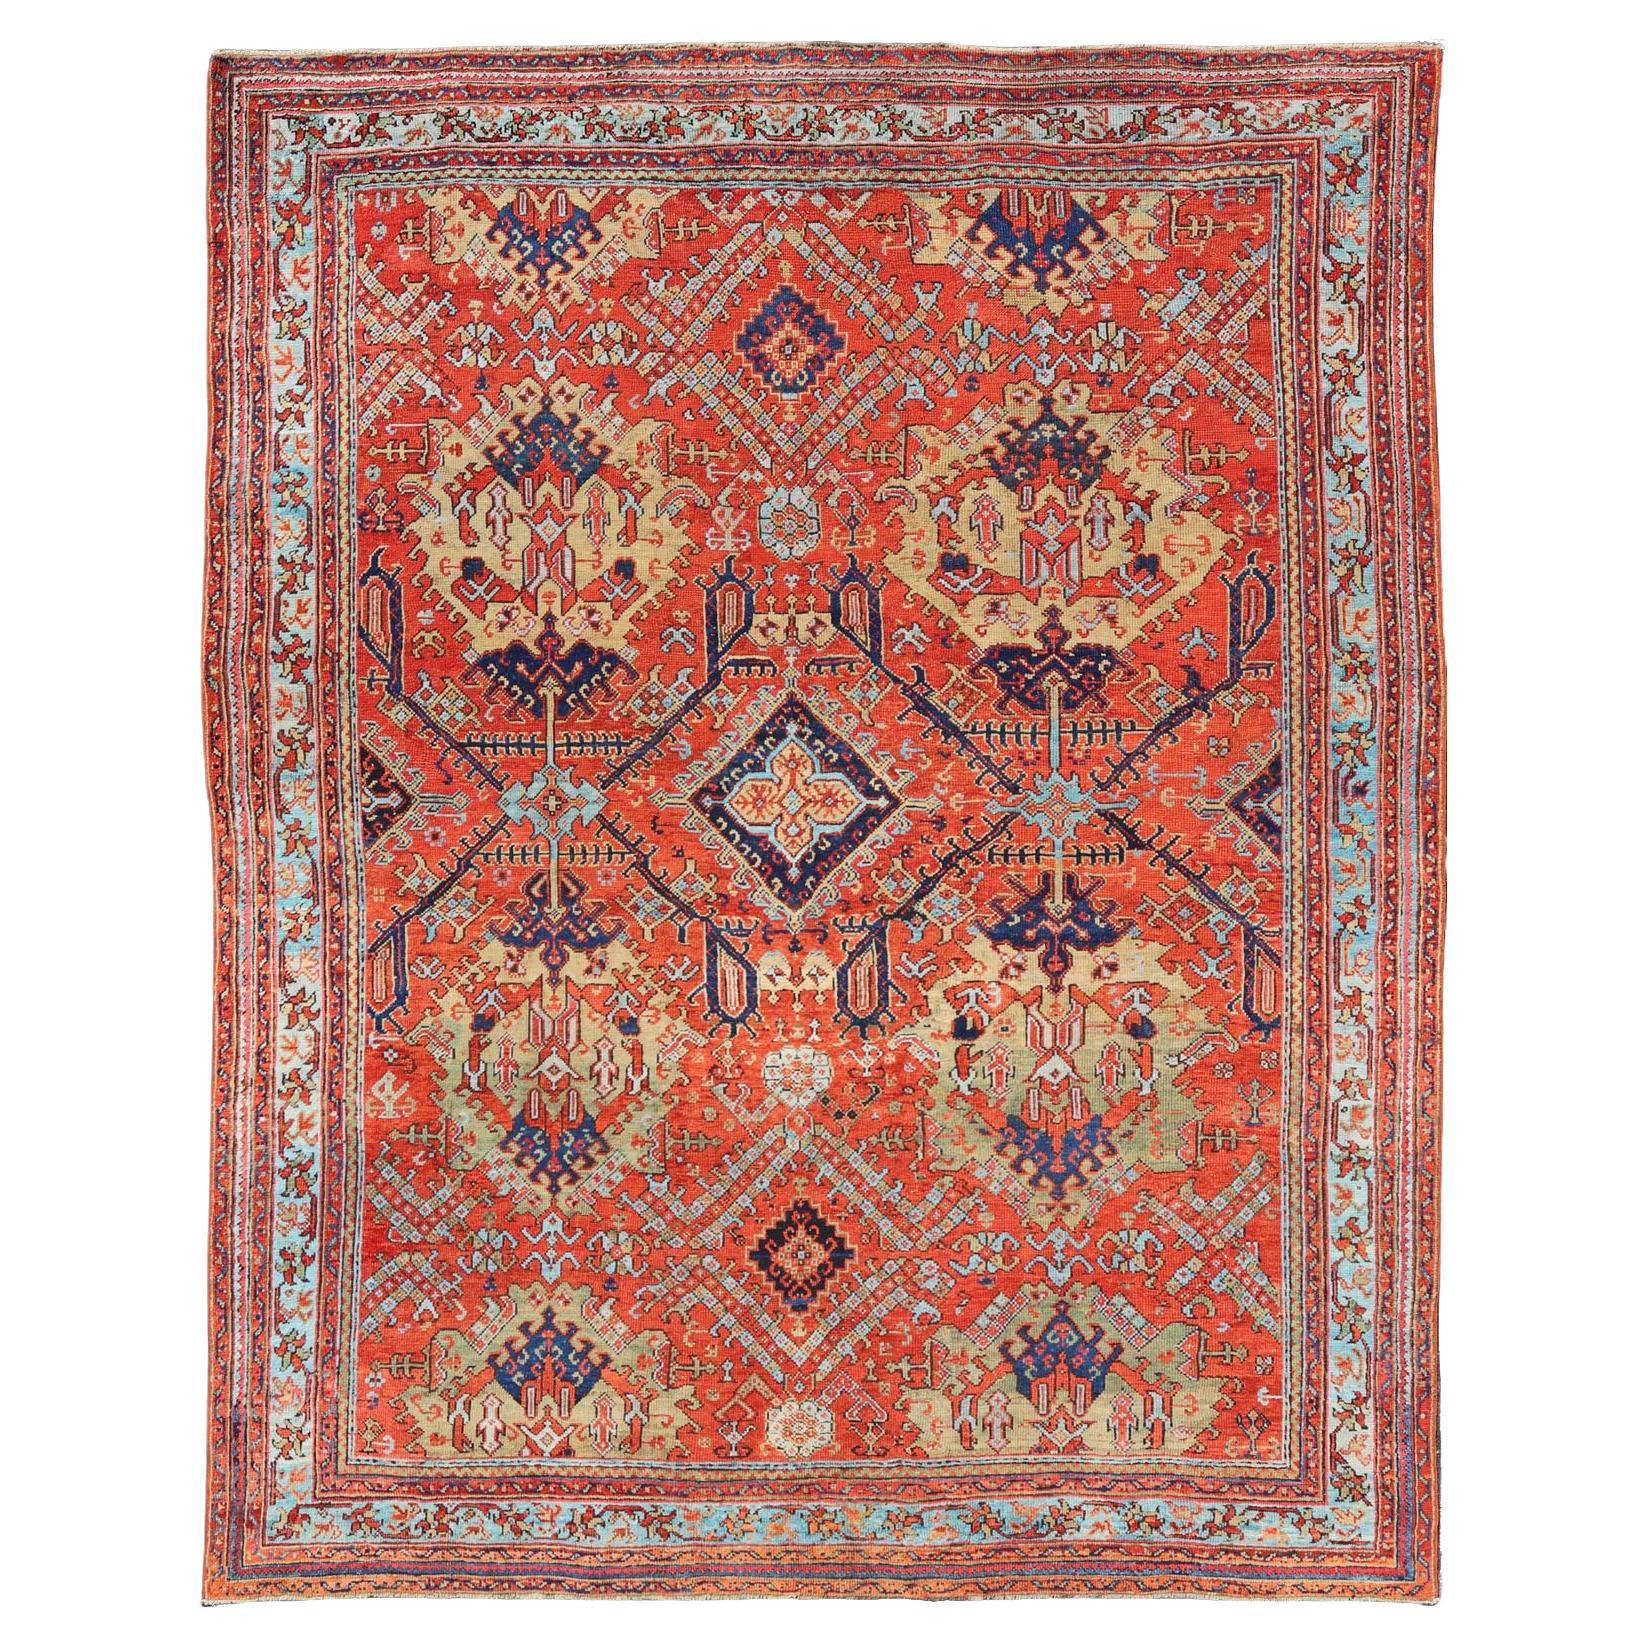 Early 20th Century Antique Oushak Rug in Large Medallions